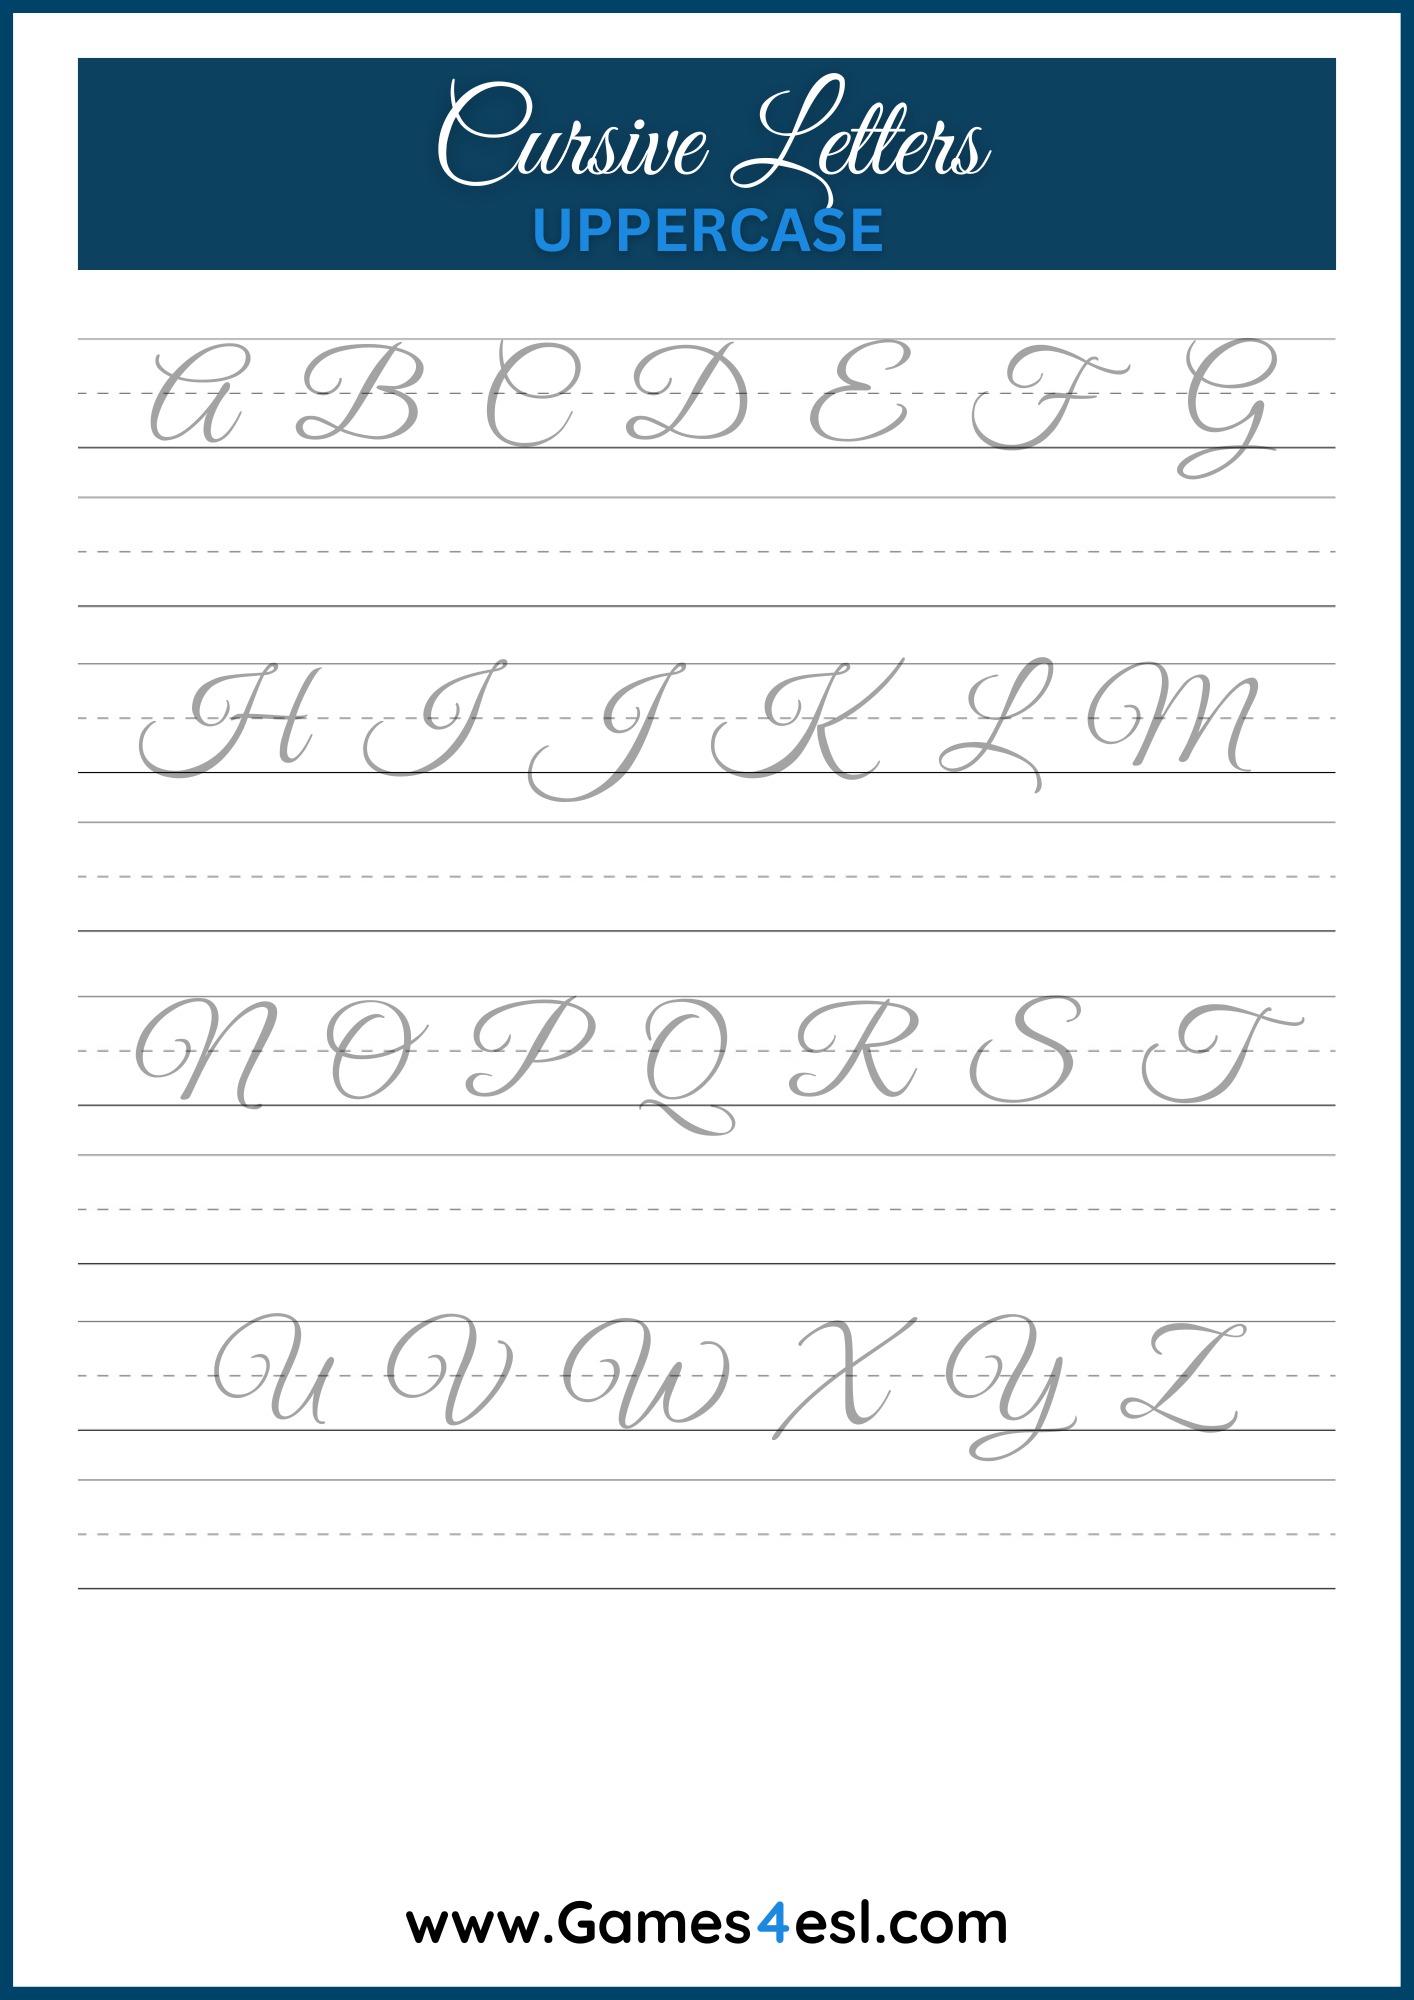 Cursive writing worksheets for letters a to z